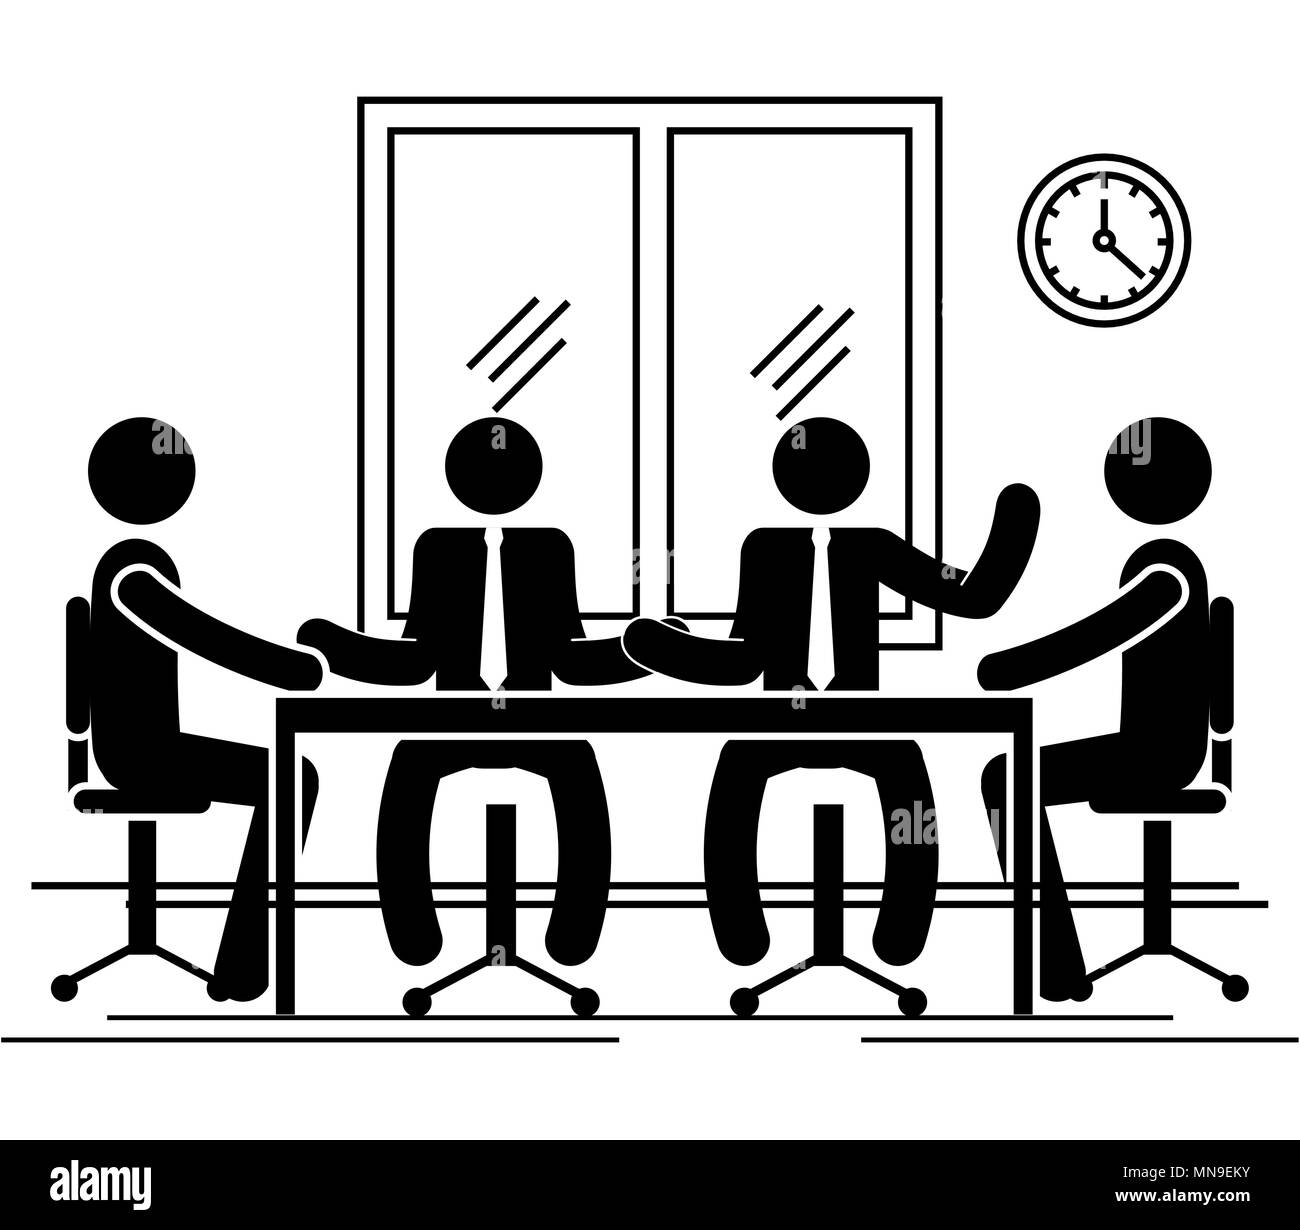 group of bussinespeople in the office Stock Vector